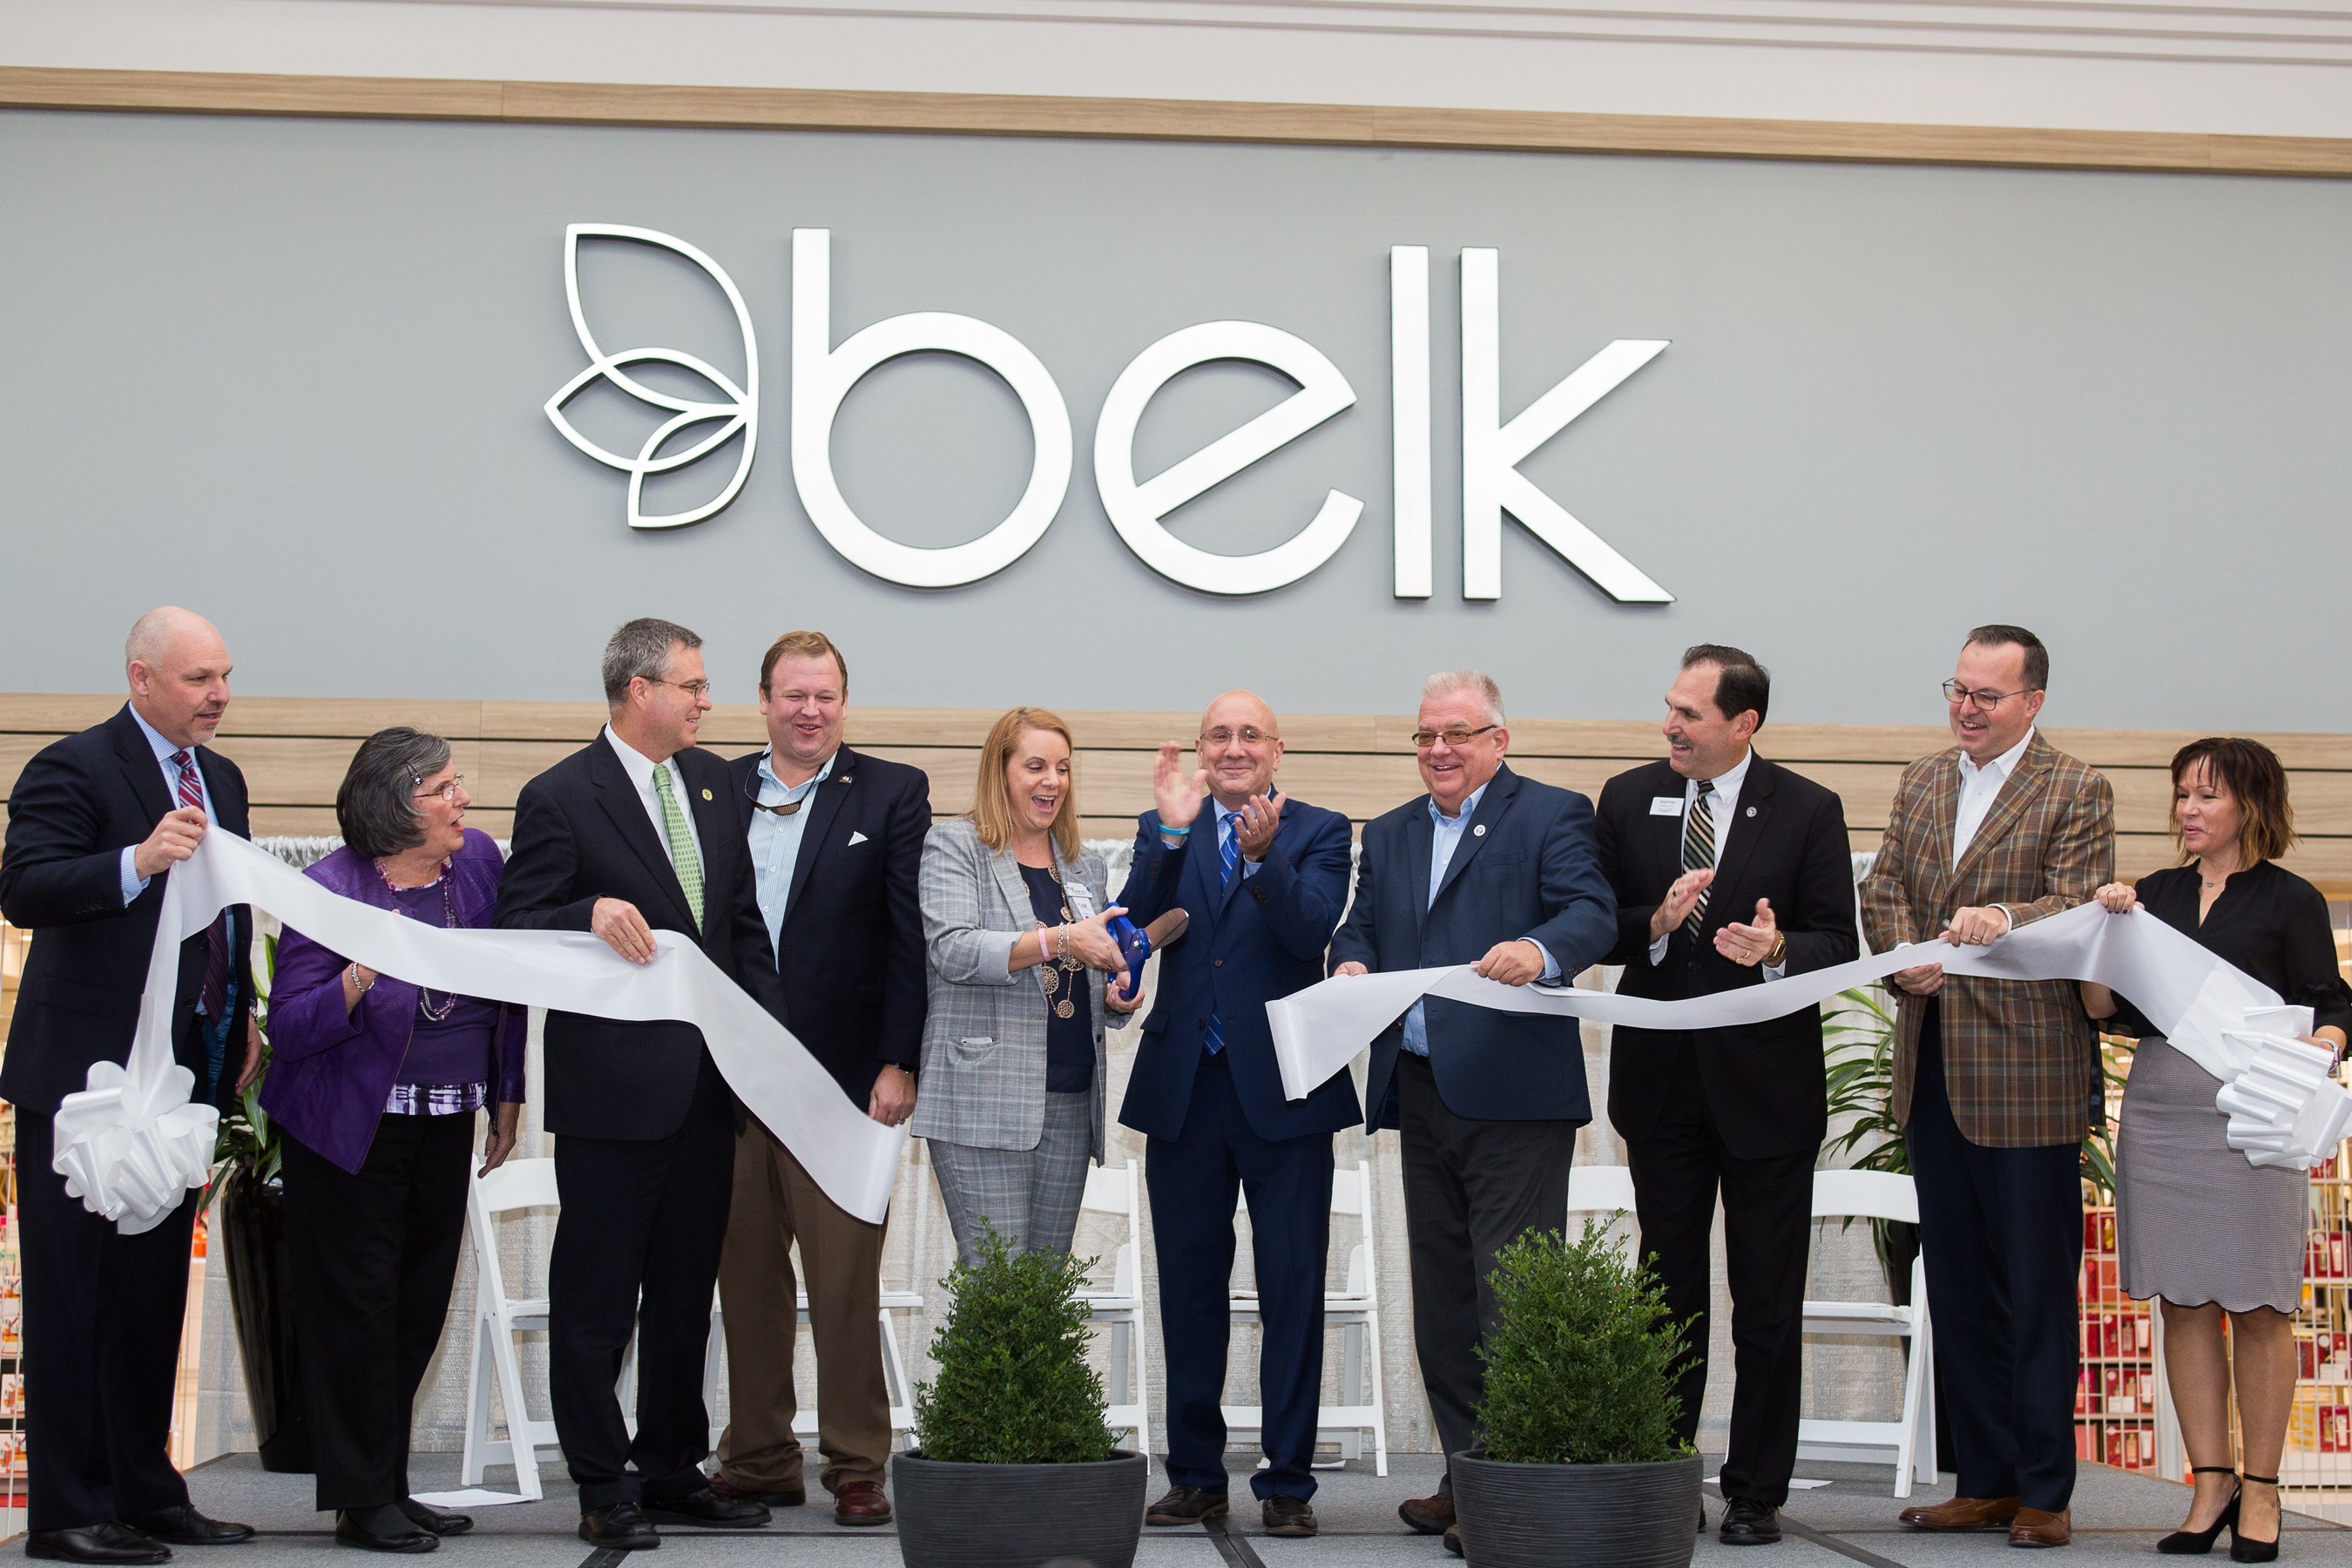 Working At Belk: Employee Reviews and Culture